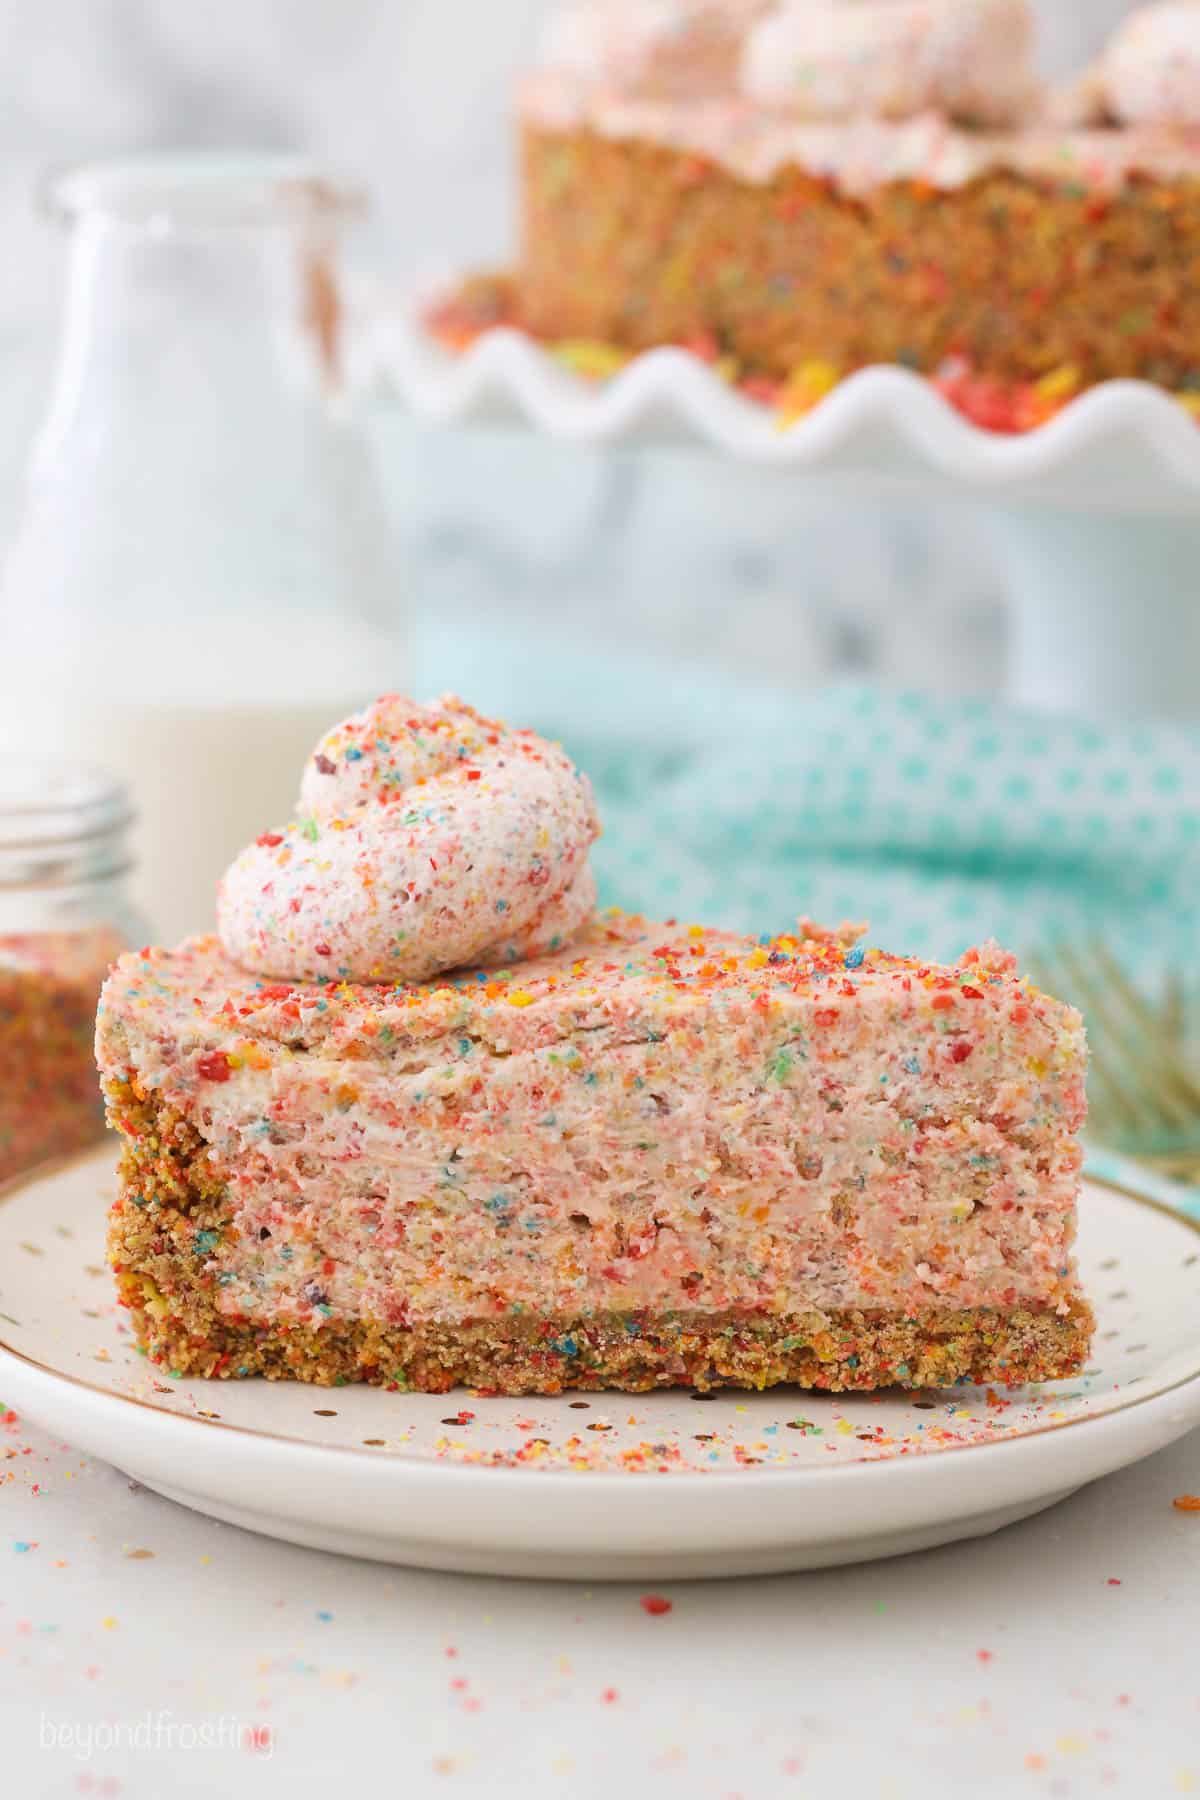 A slice of fruity pebbles cheesecake on a white plate